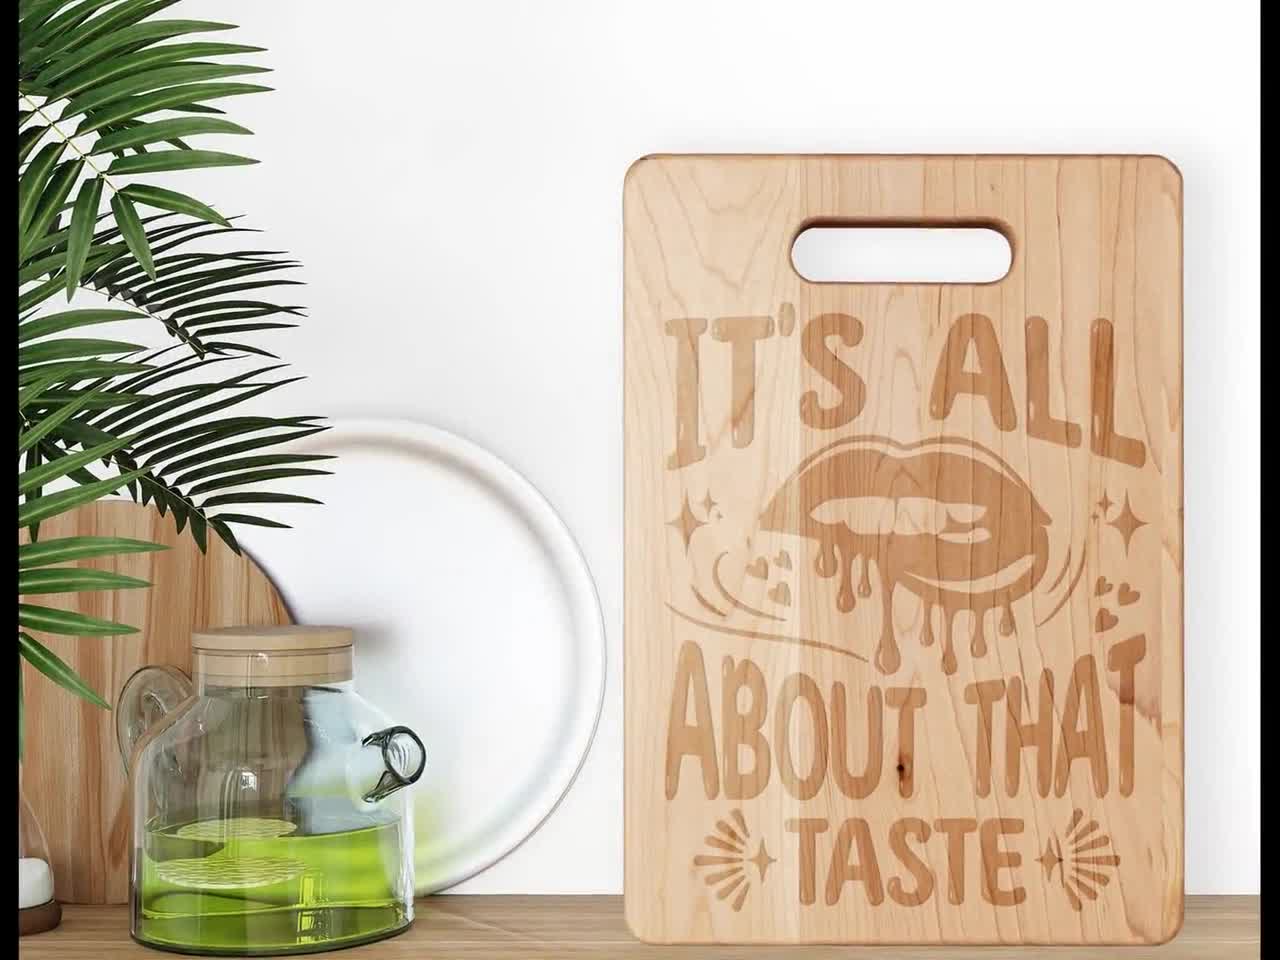 It's All About That Taste Maple Wood Cutting Board, Walnut Cheese Board,  Wooden Charcuterie Board Dad's Gift, Serving Breadboard for Husband -   UK